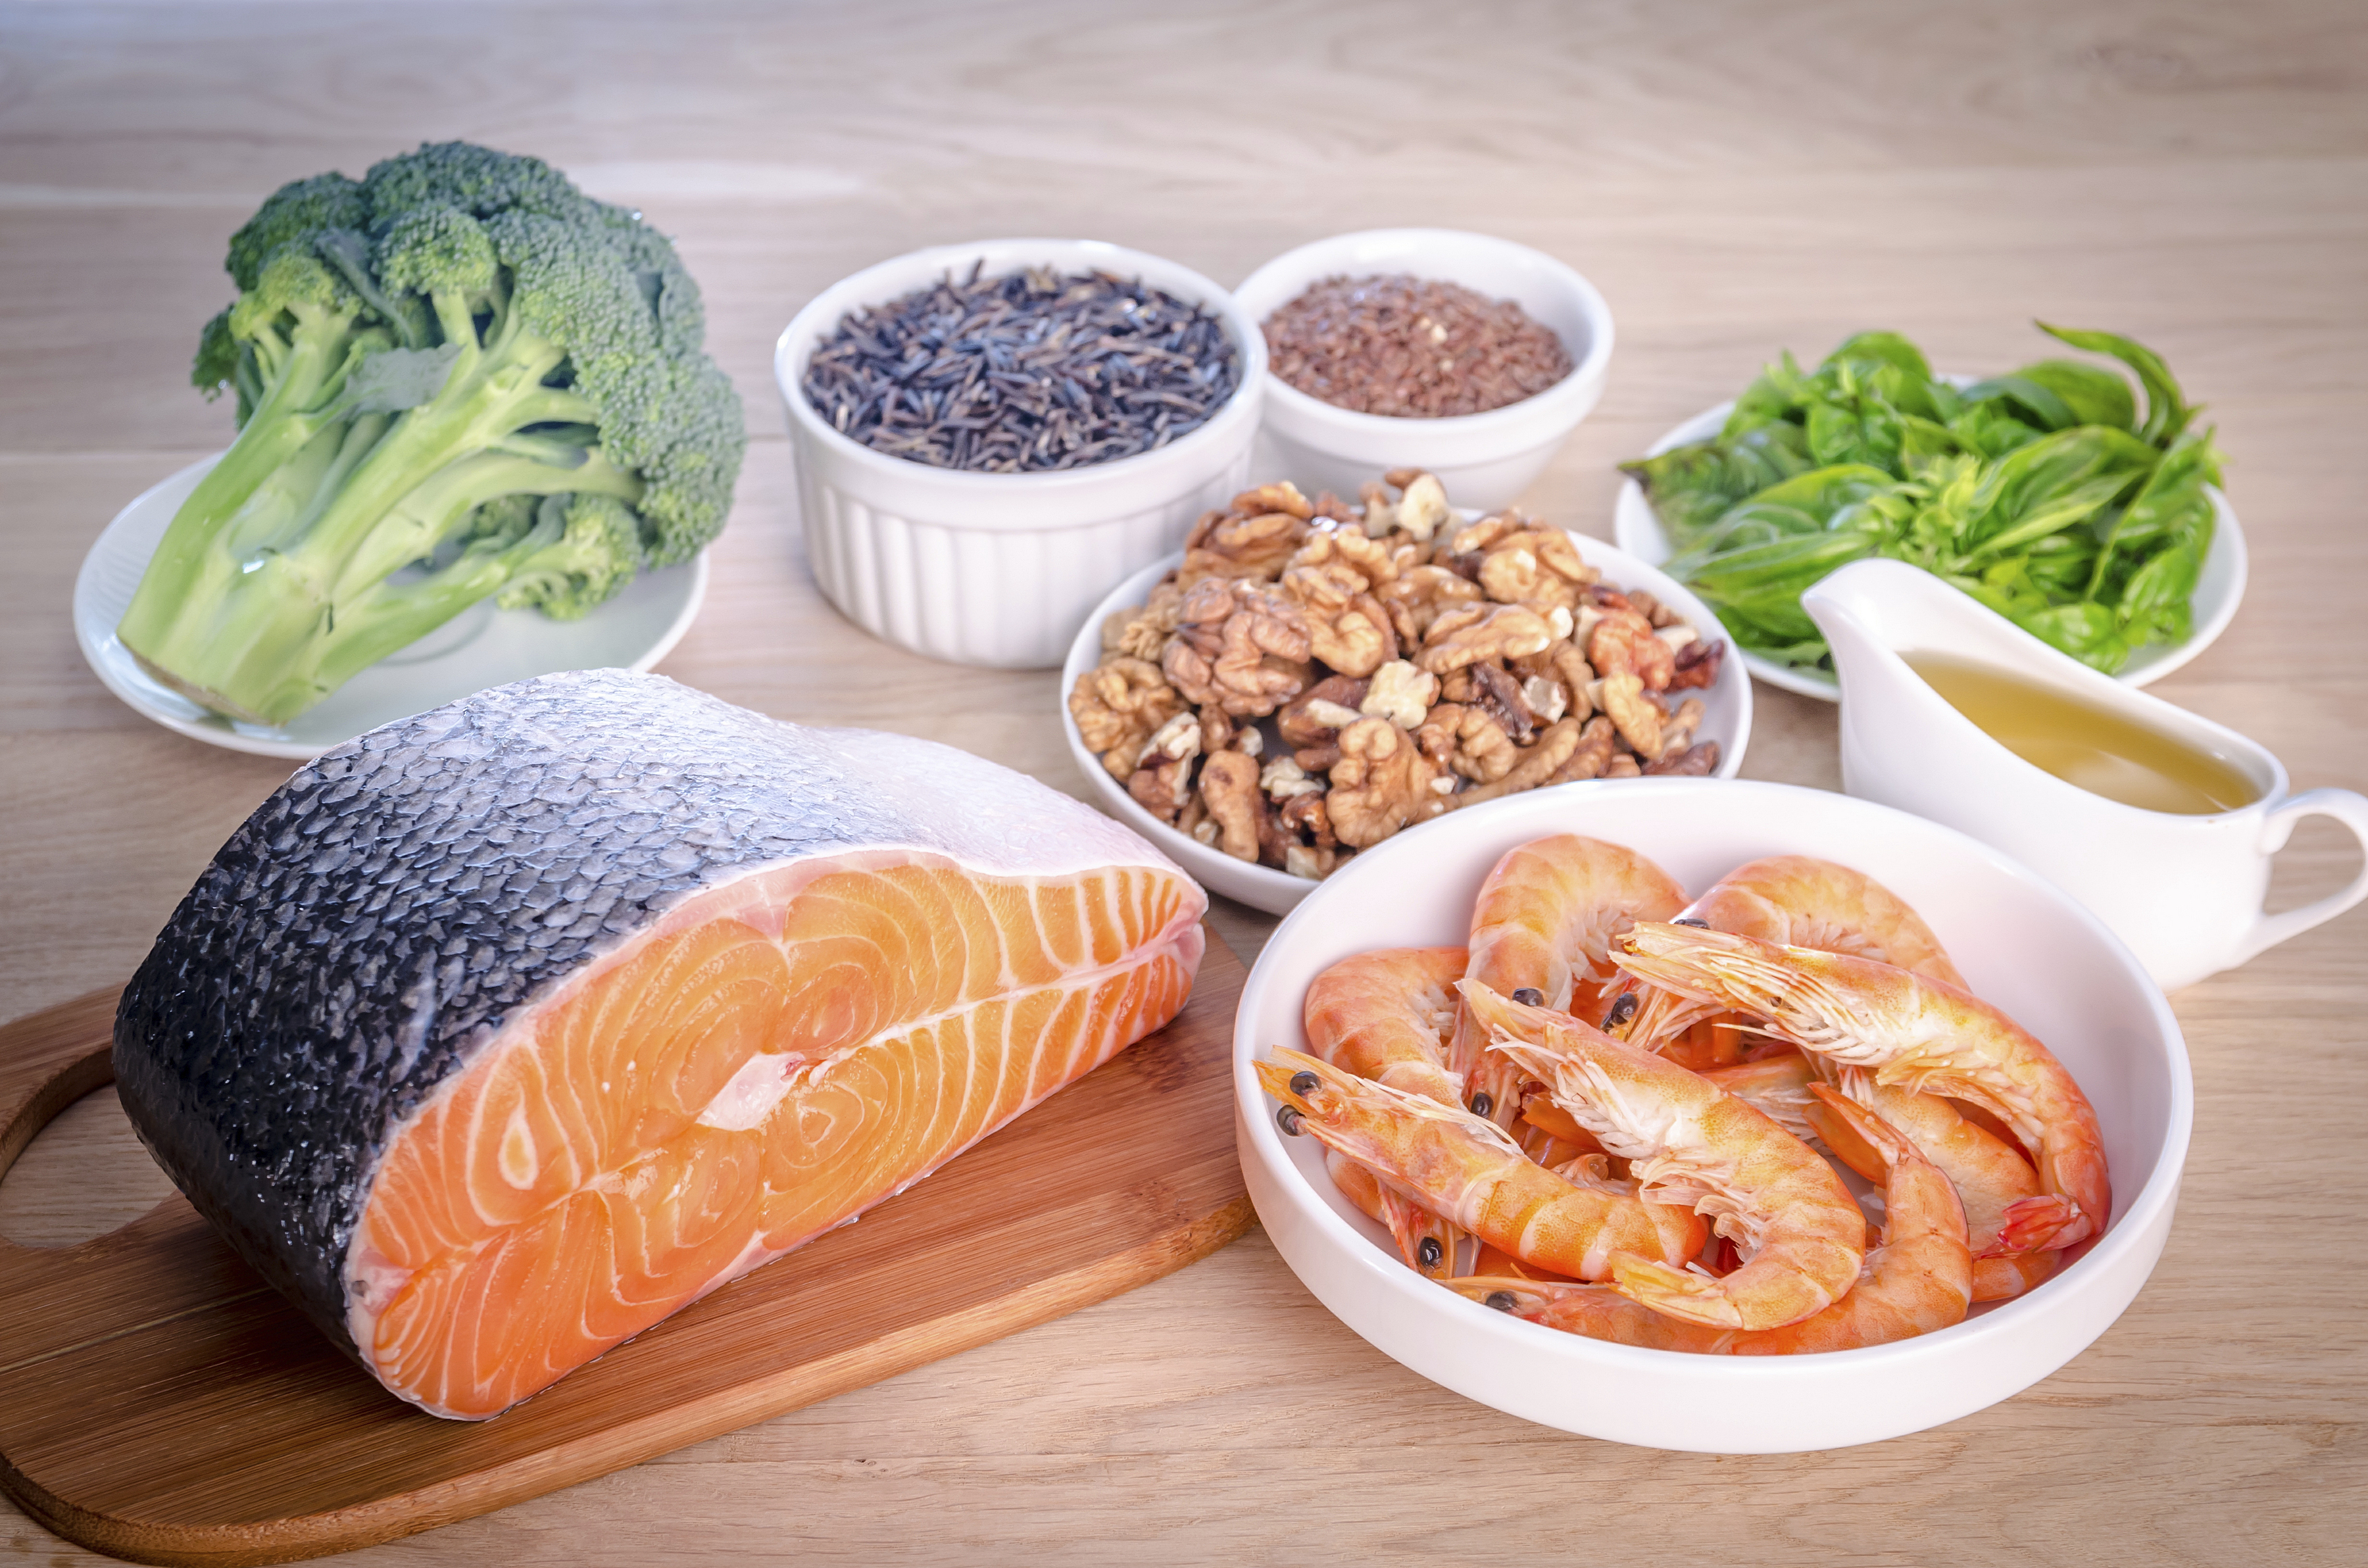 Healthy foods, including a salmon fillet, shrimp, nuts, wild rice, broccoli, spinach, and olive oil, representing a balanced diet rich in proteins, omega-3 fatty acids, and greens.